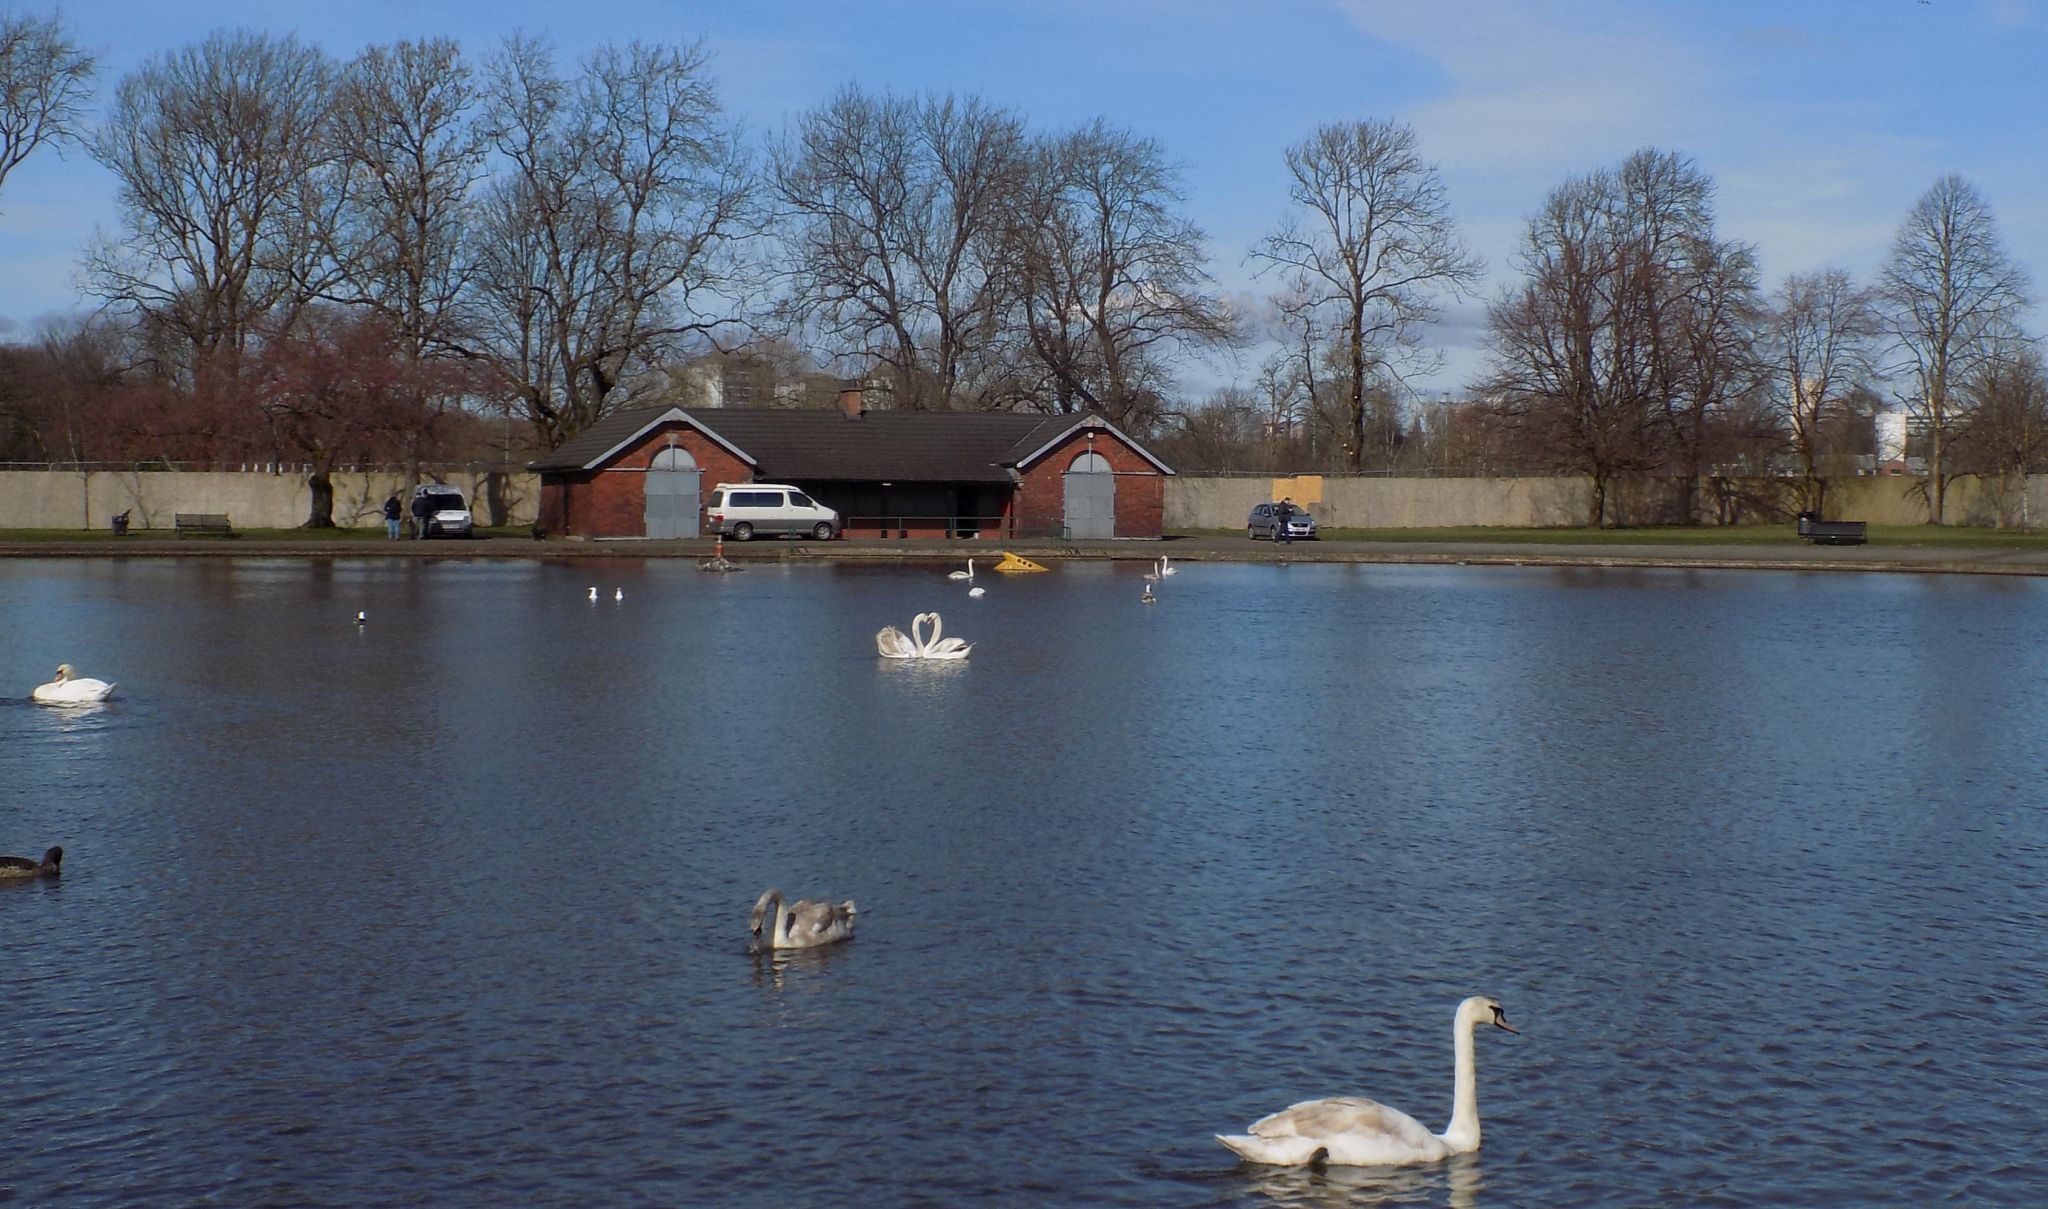 The boating pond in Richmond Park